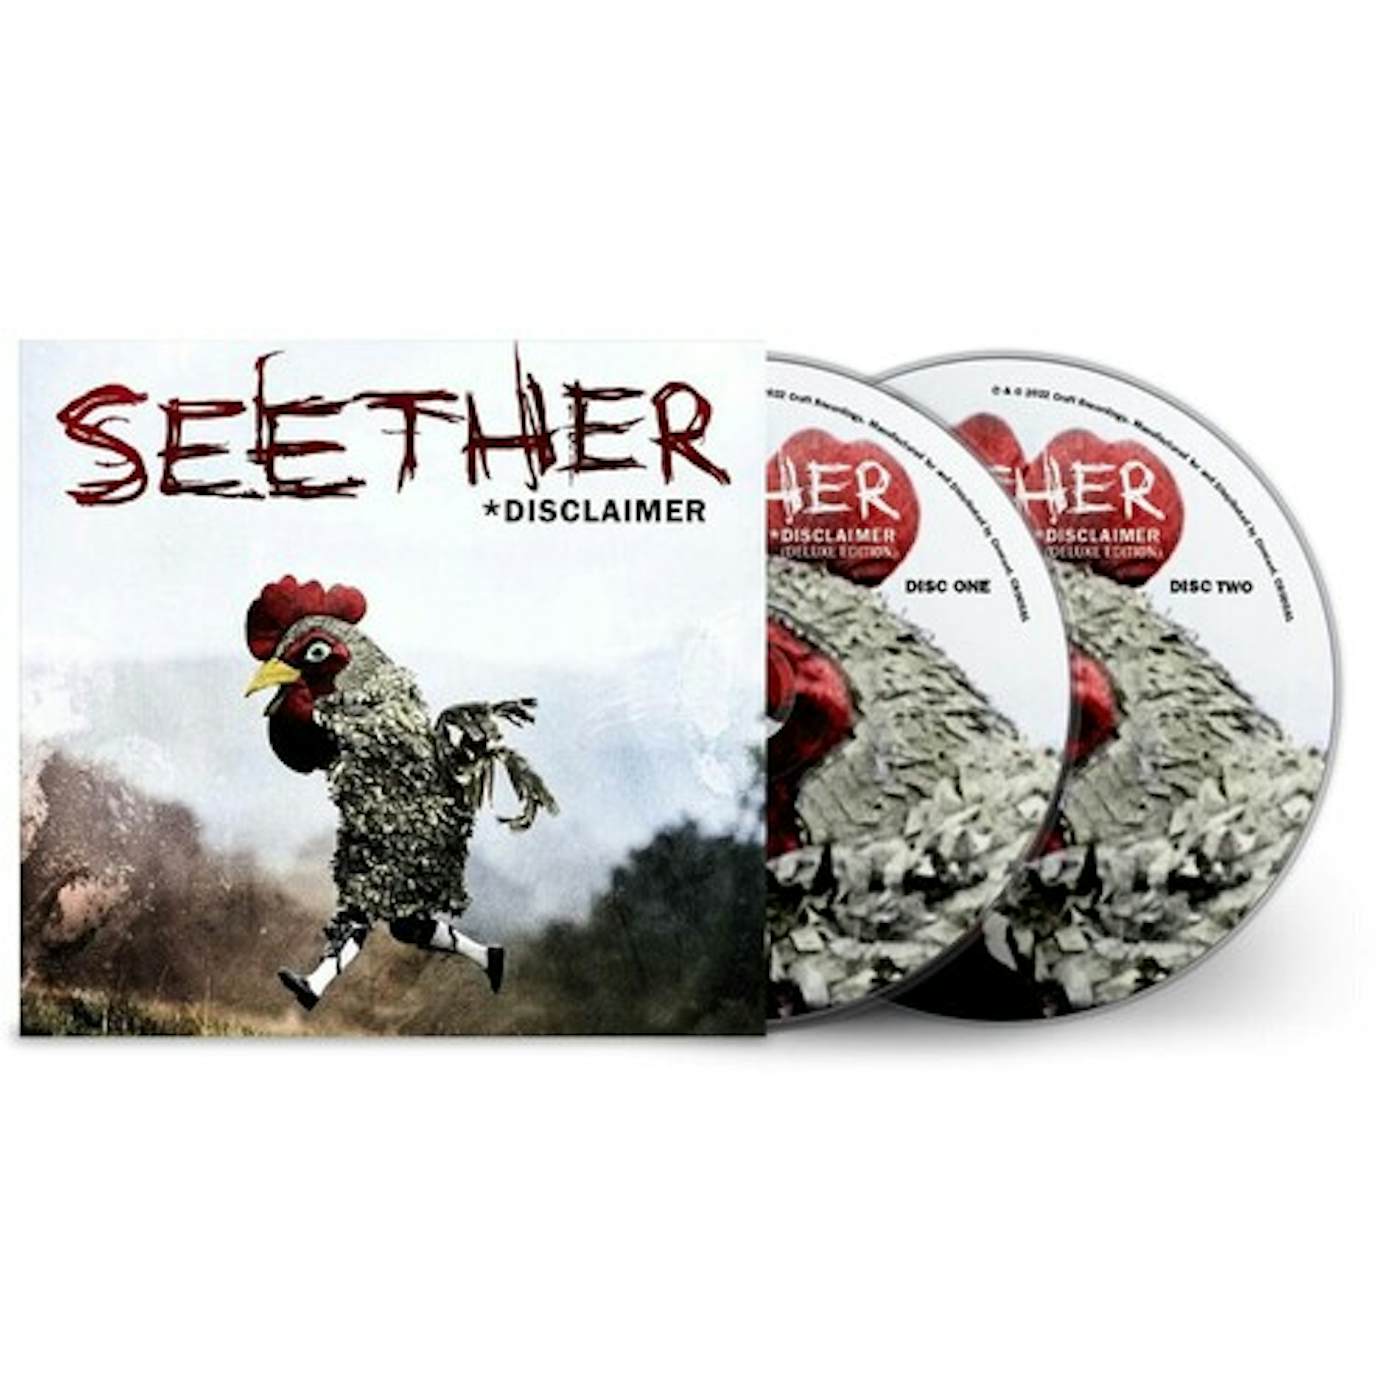 Seether DISCLAIMER (20TH ANNIVERSARY EDITION) CD